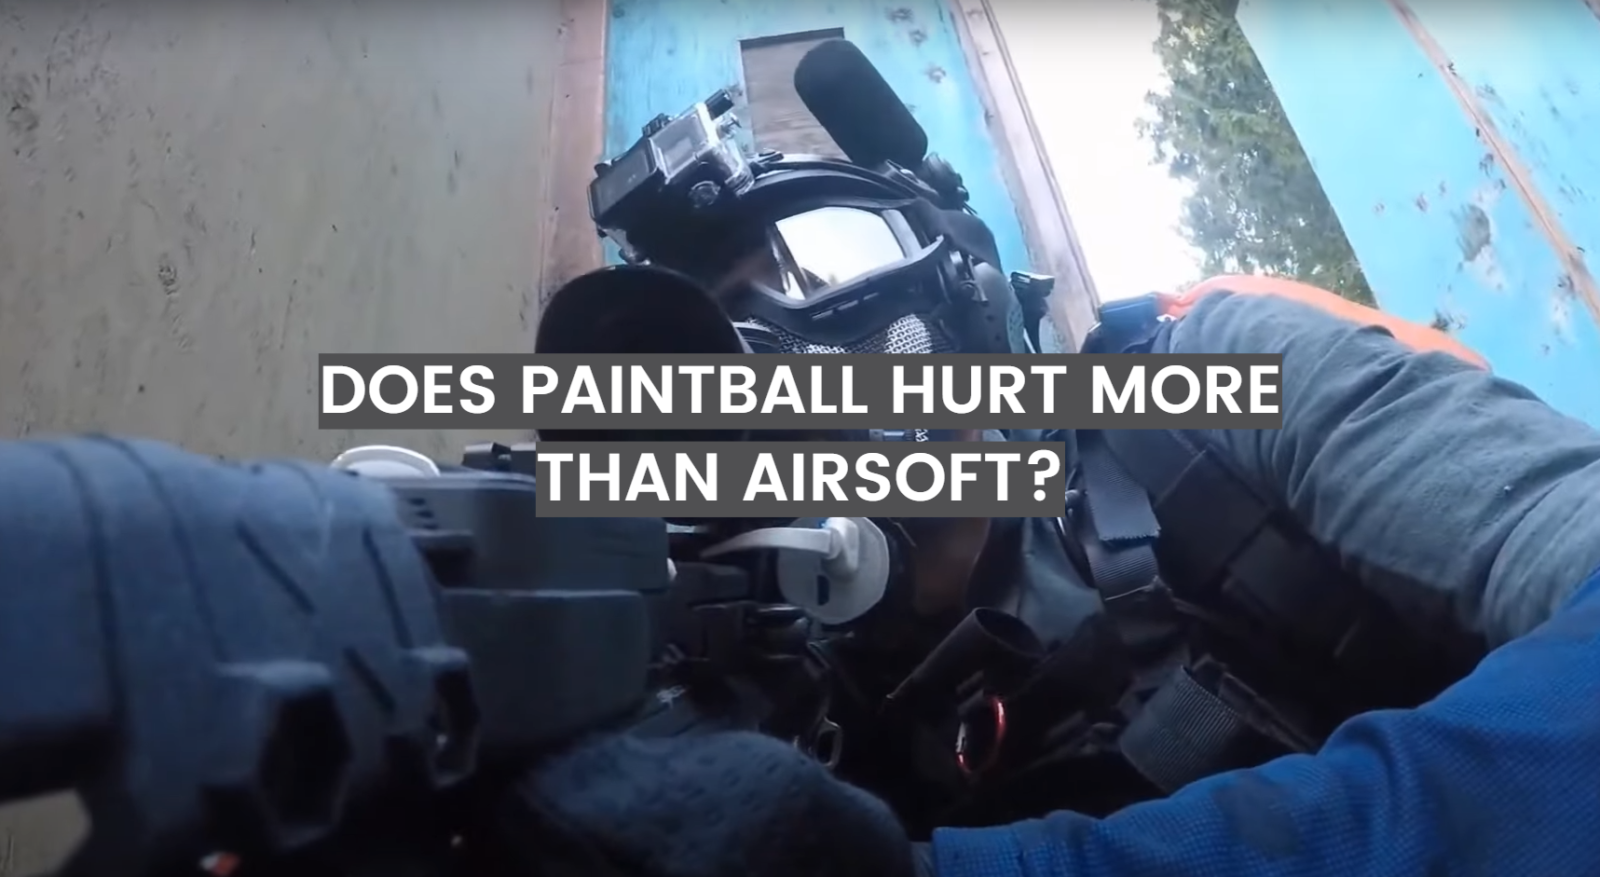 Does Paintball Hurt More Than Airsoft?